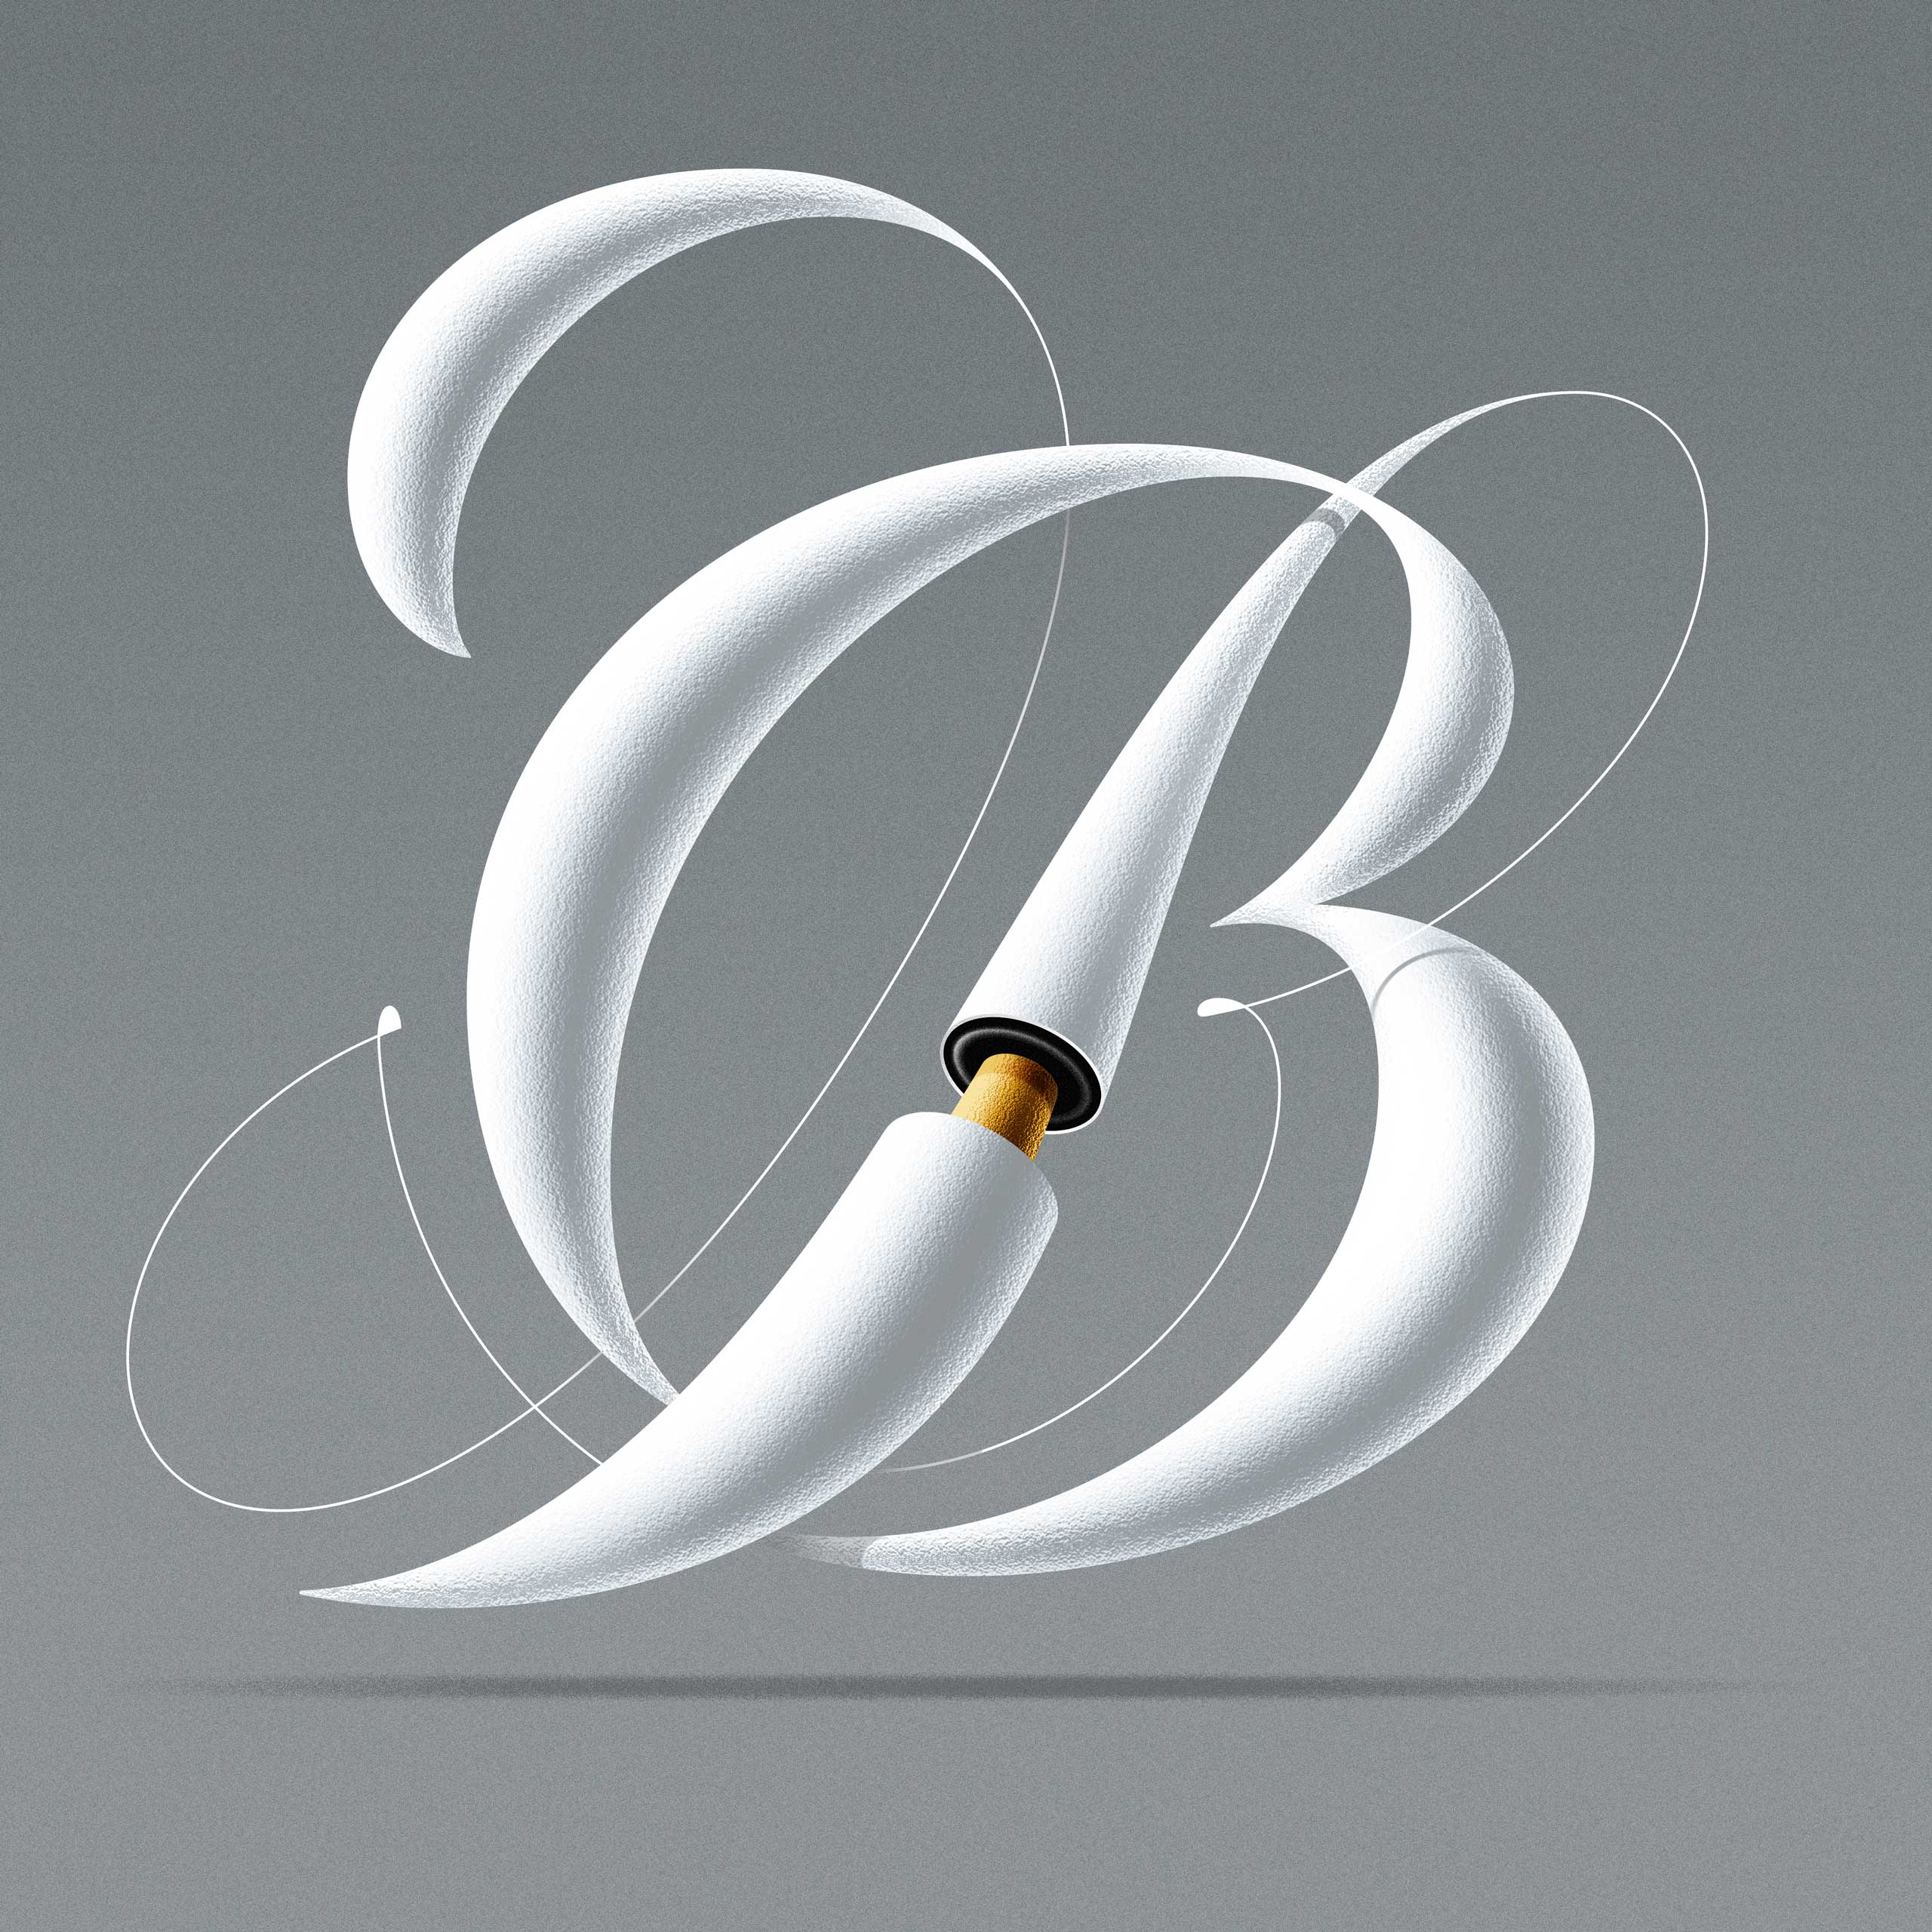 Letter B by Dan Forster - Illustrated type – 3D type